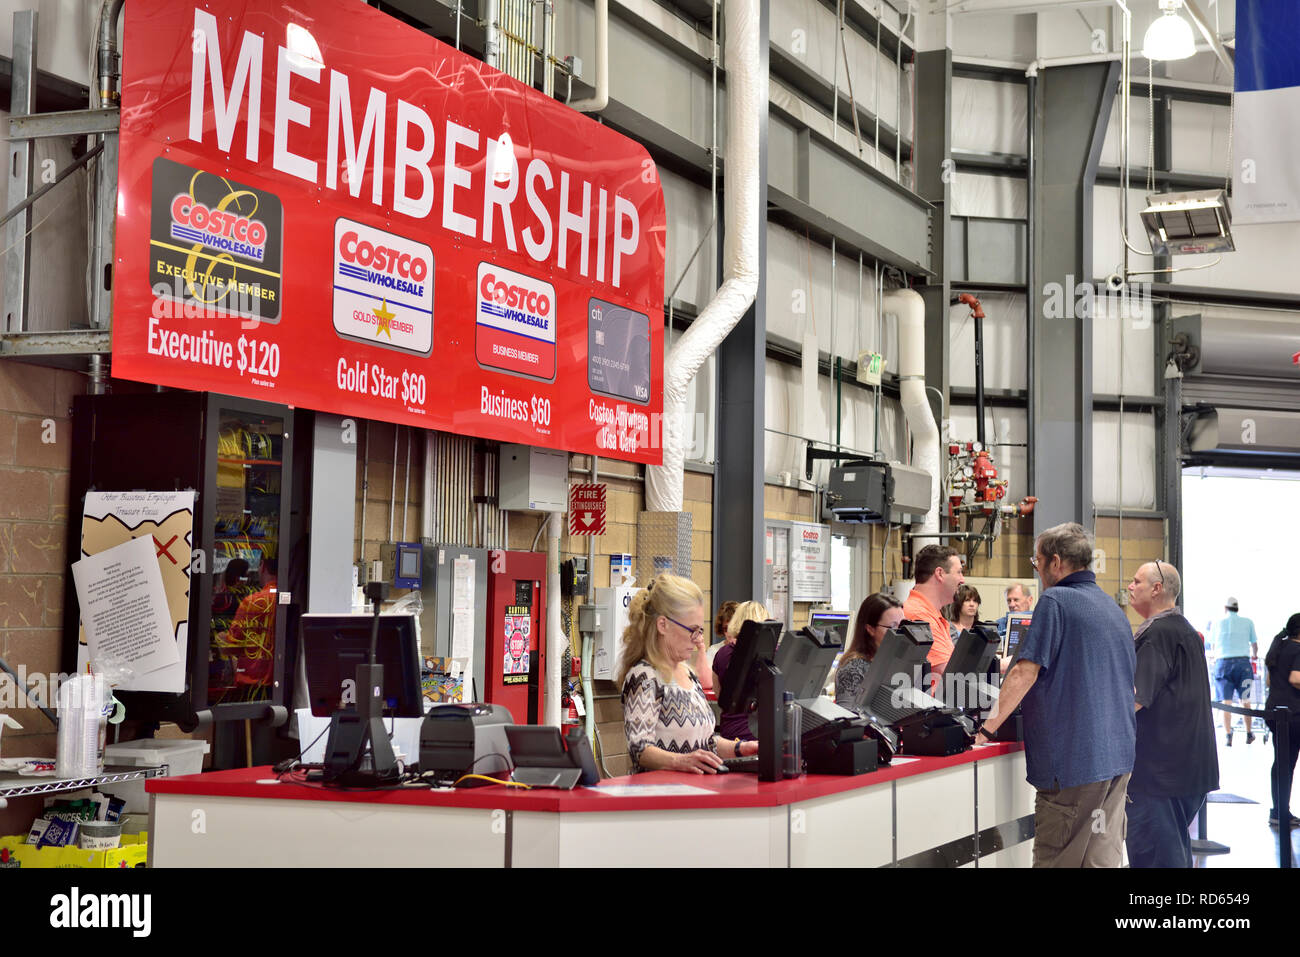 Costco wholesale warehouse membership counter with sign indicating costs of types of membership, USA Stock Photo